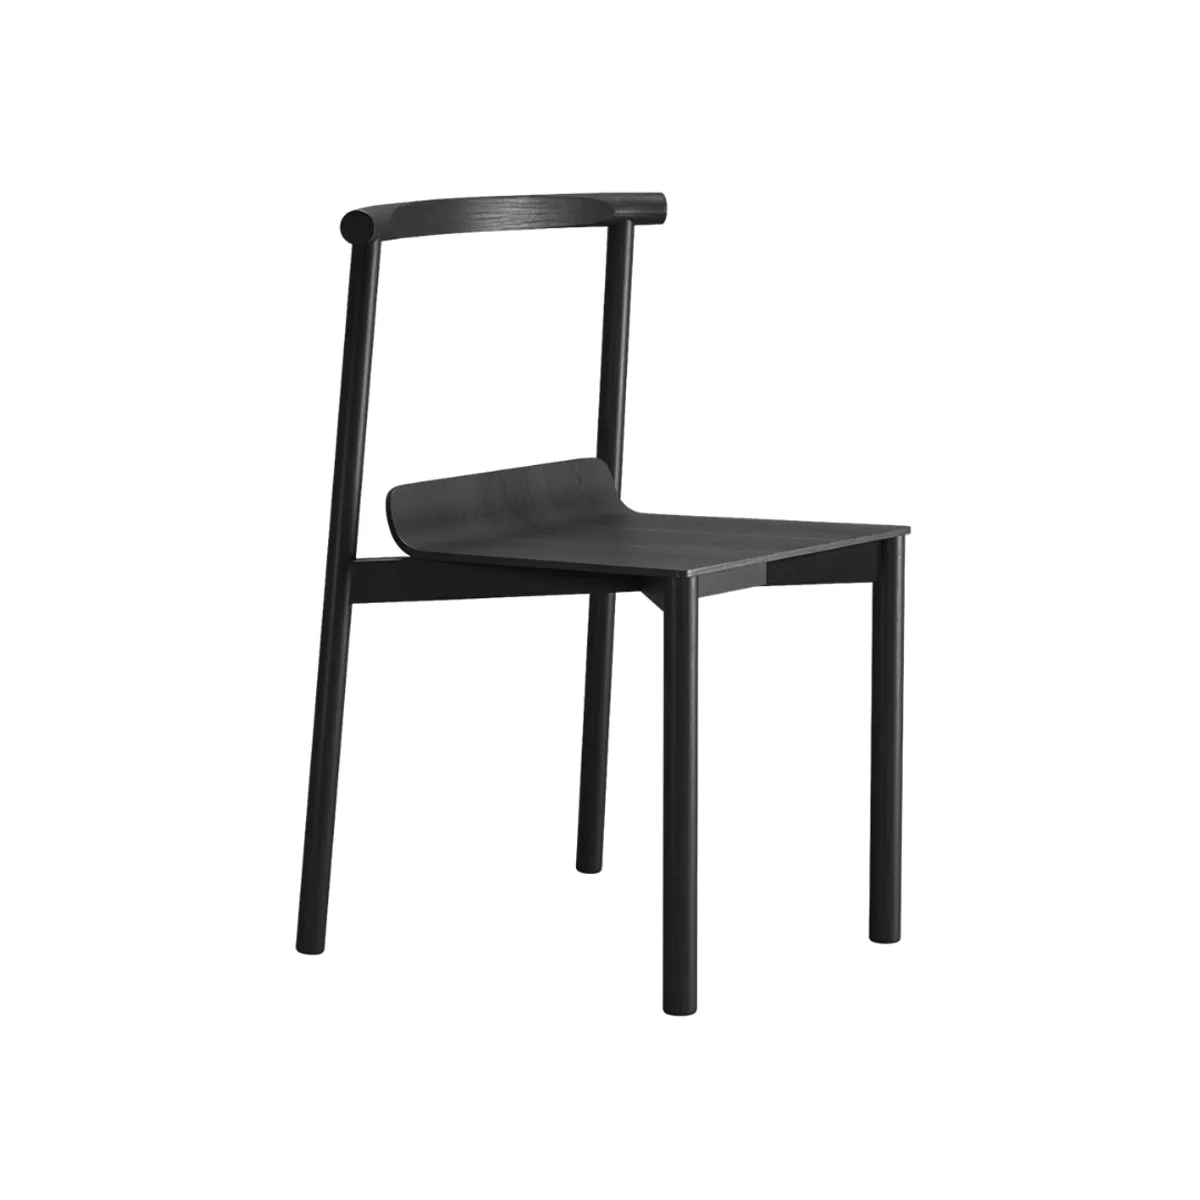 Wox side chair 1